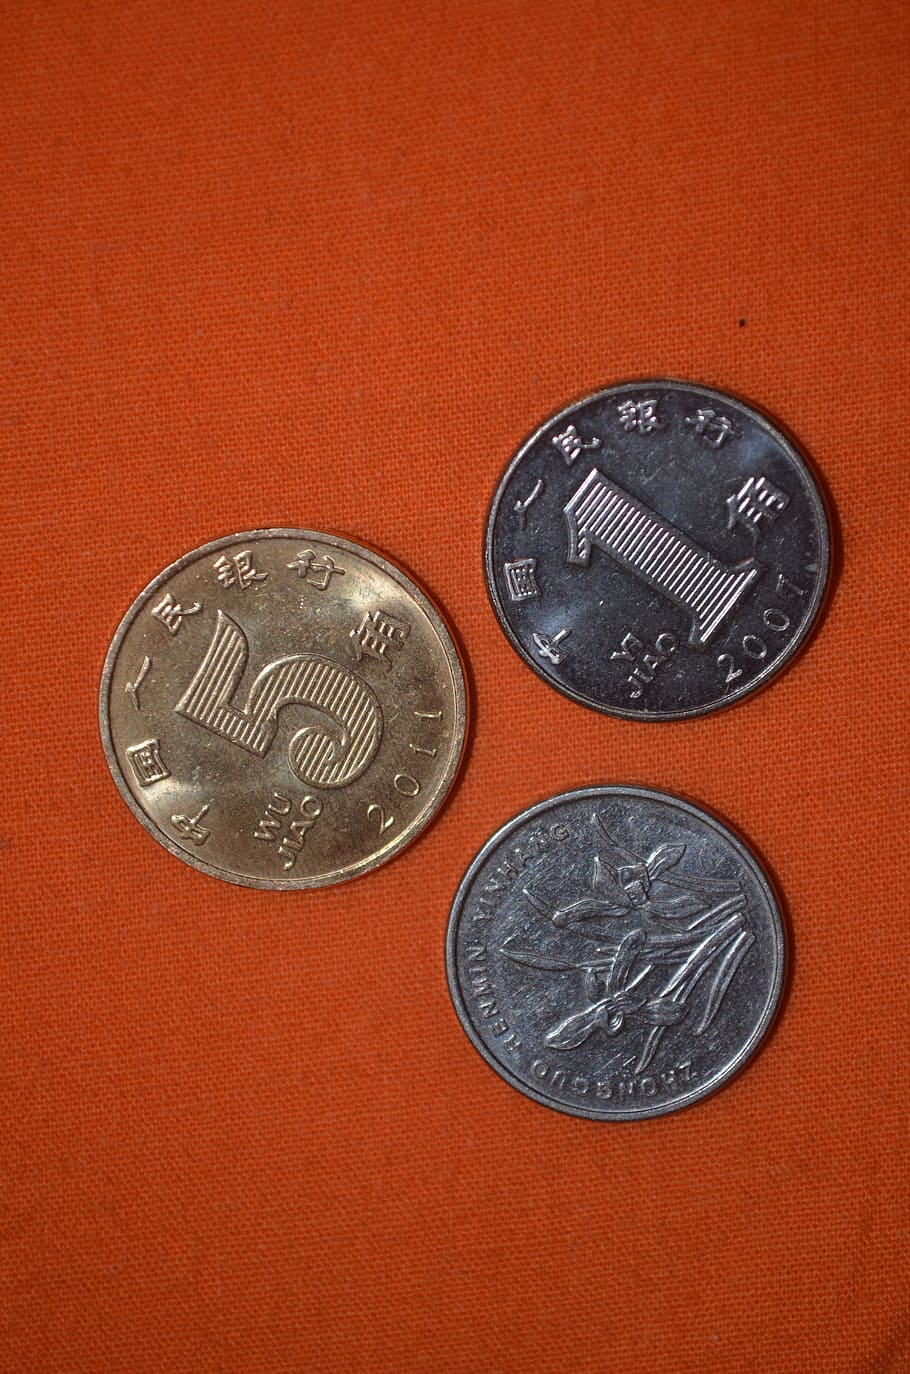 coin, coins, small, value, currency, chinese, prc, money, change, pocket